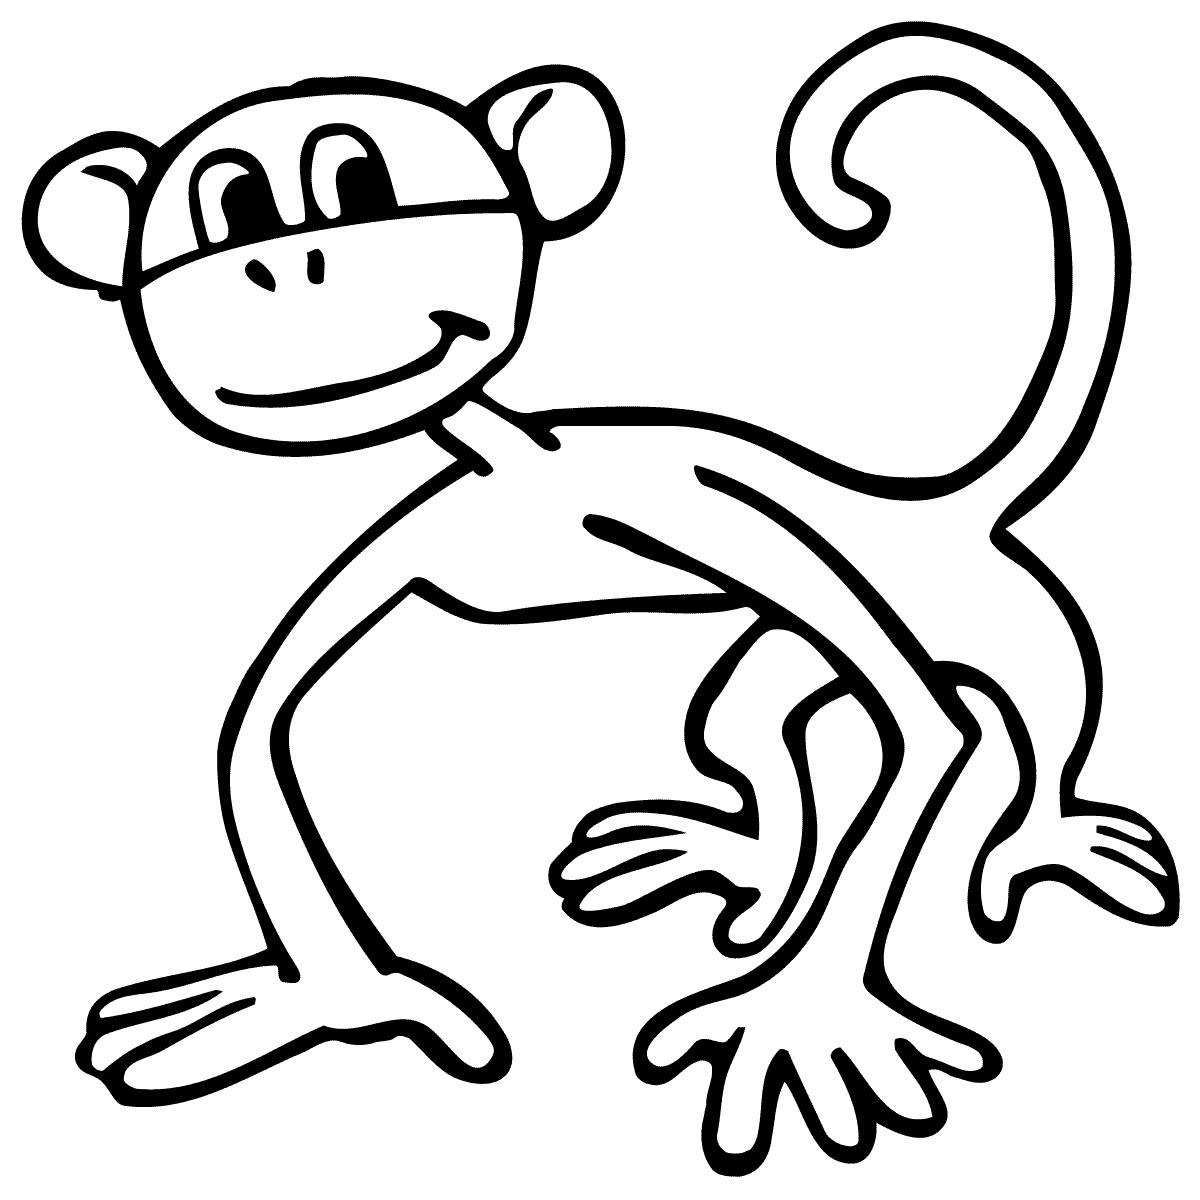 Cute Animated Monkey - ClipArt Best